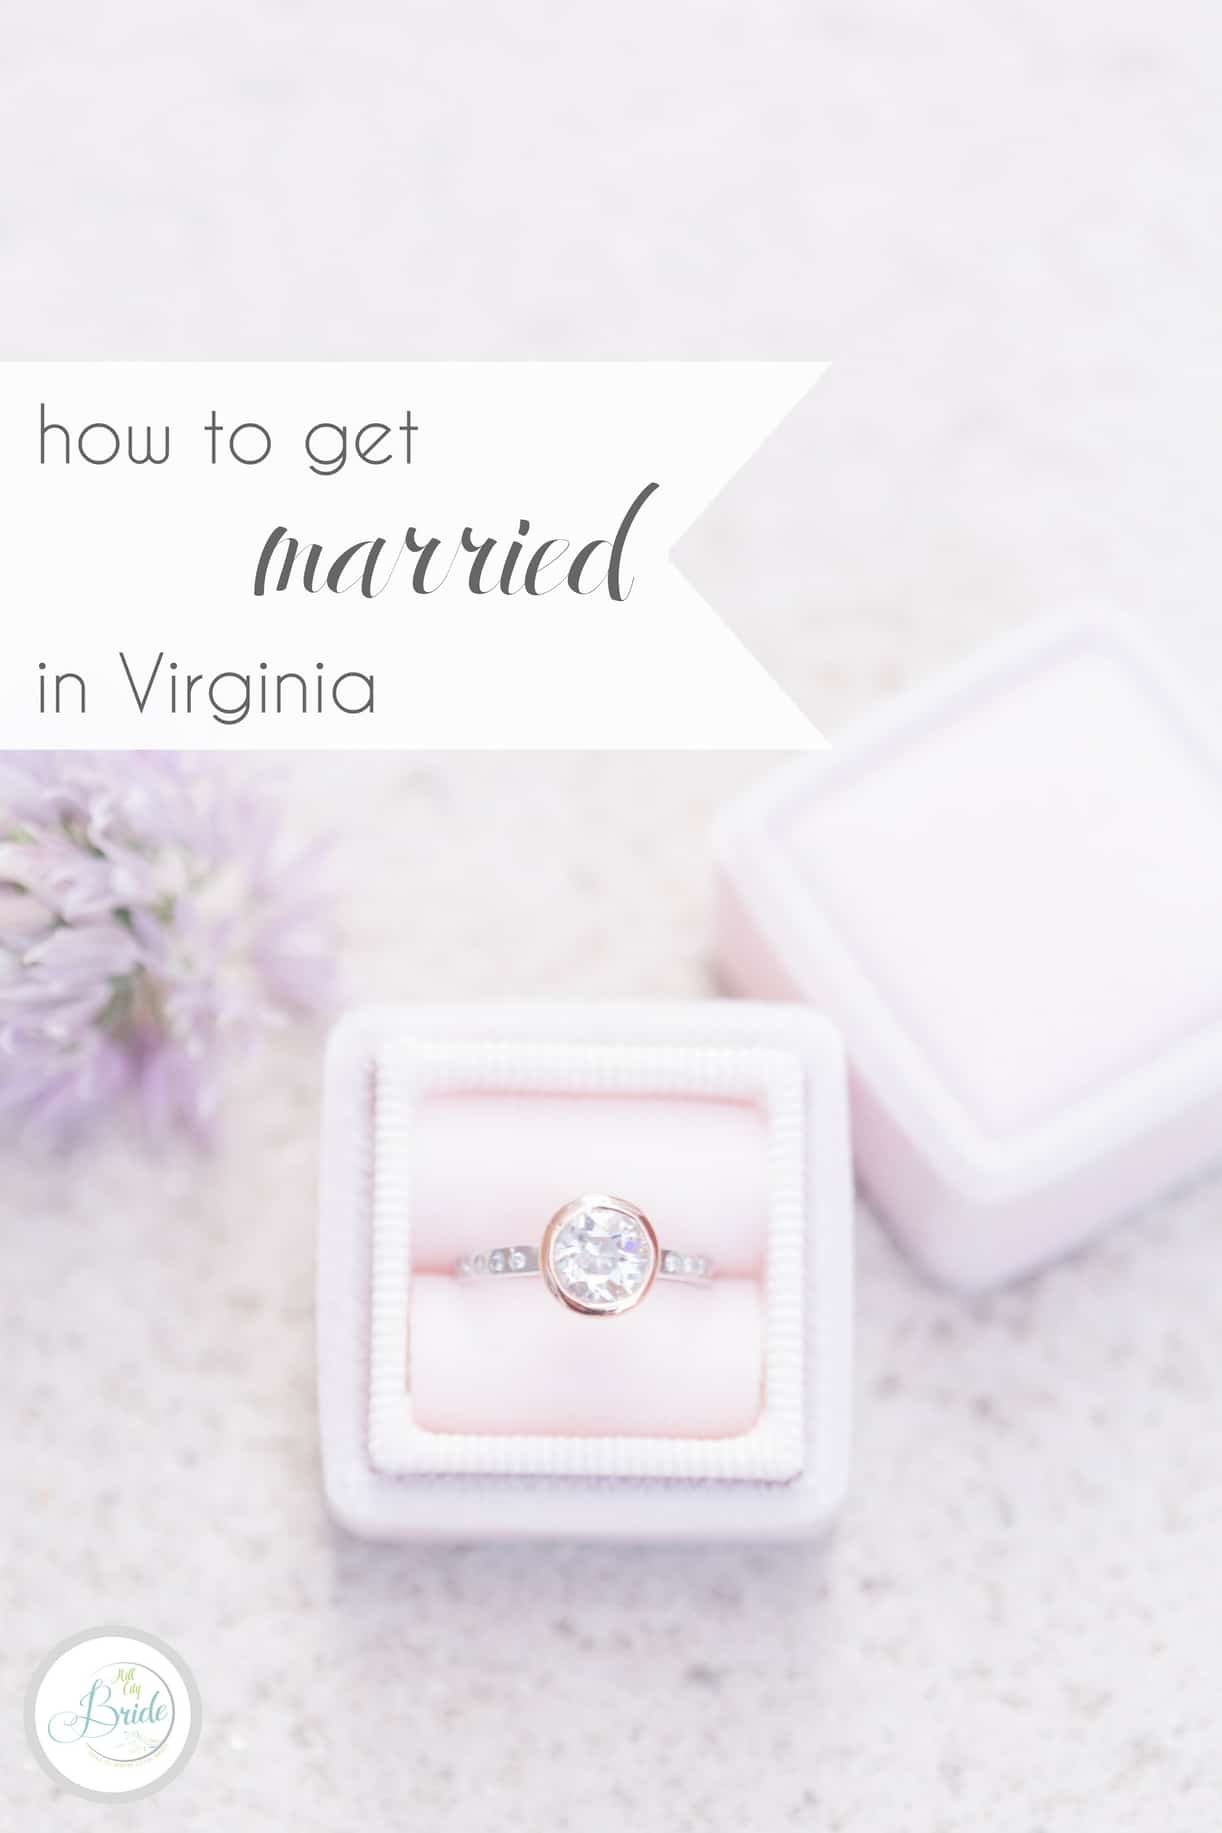 How to Get Married in Virginia | Hill City Bride Wedding Blog